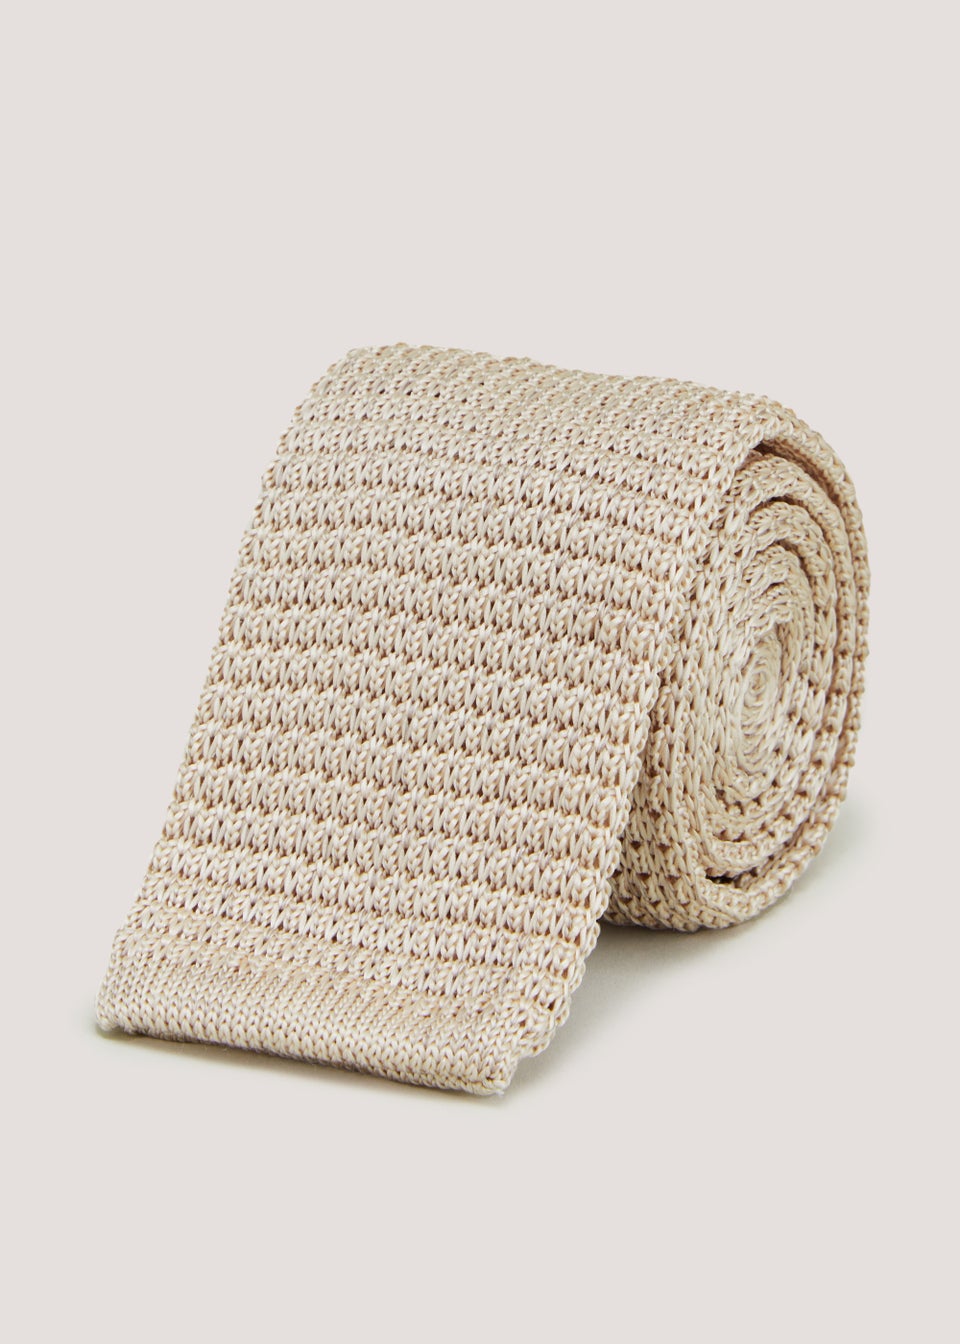 Taylor & Wright Champagne Knitted Tie - Matalan